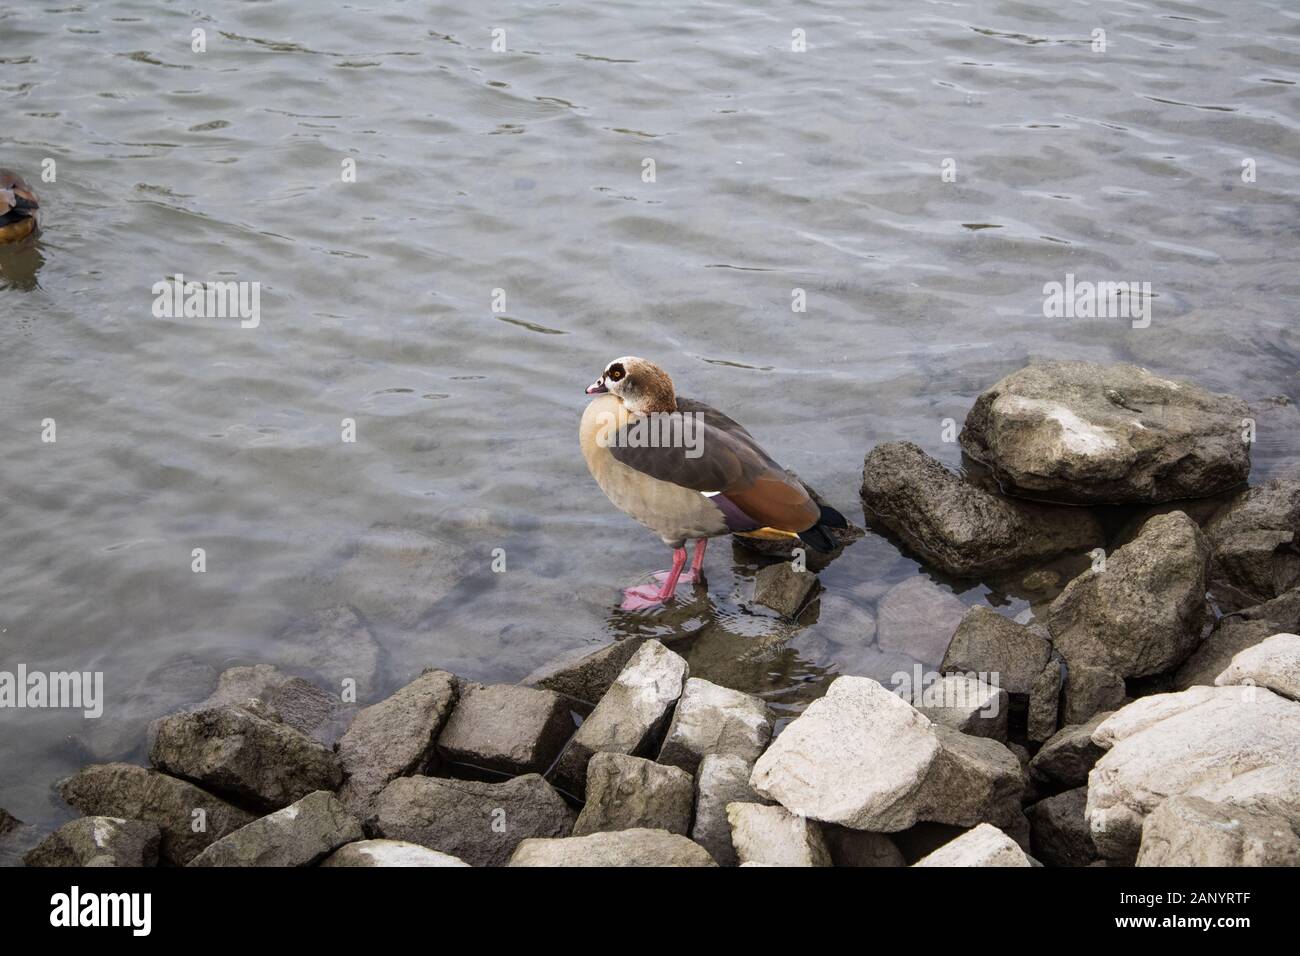 seabird on a riverbanks chilling Stock Photo